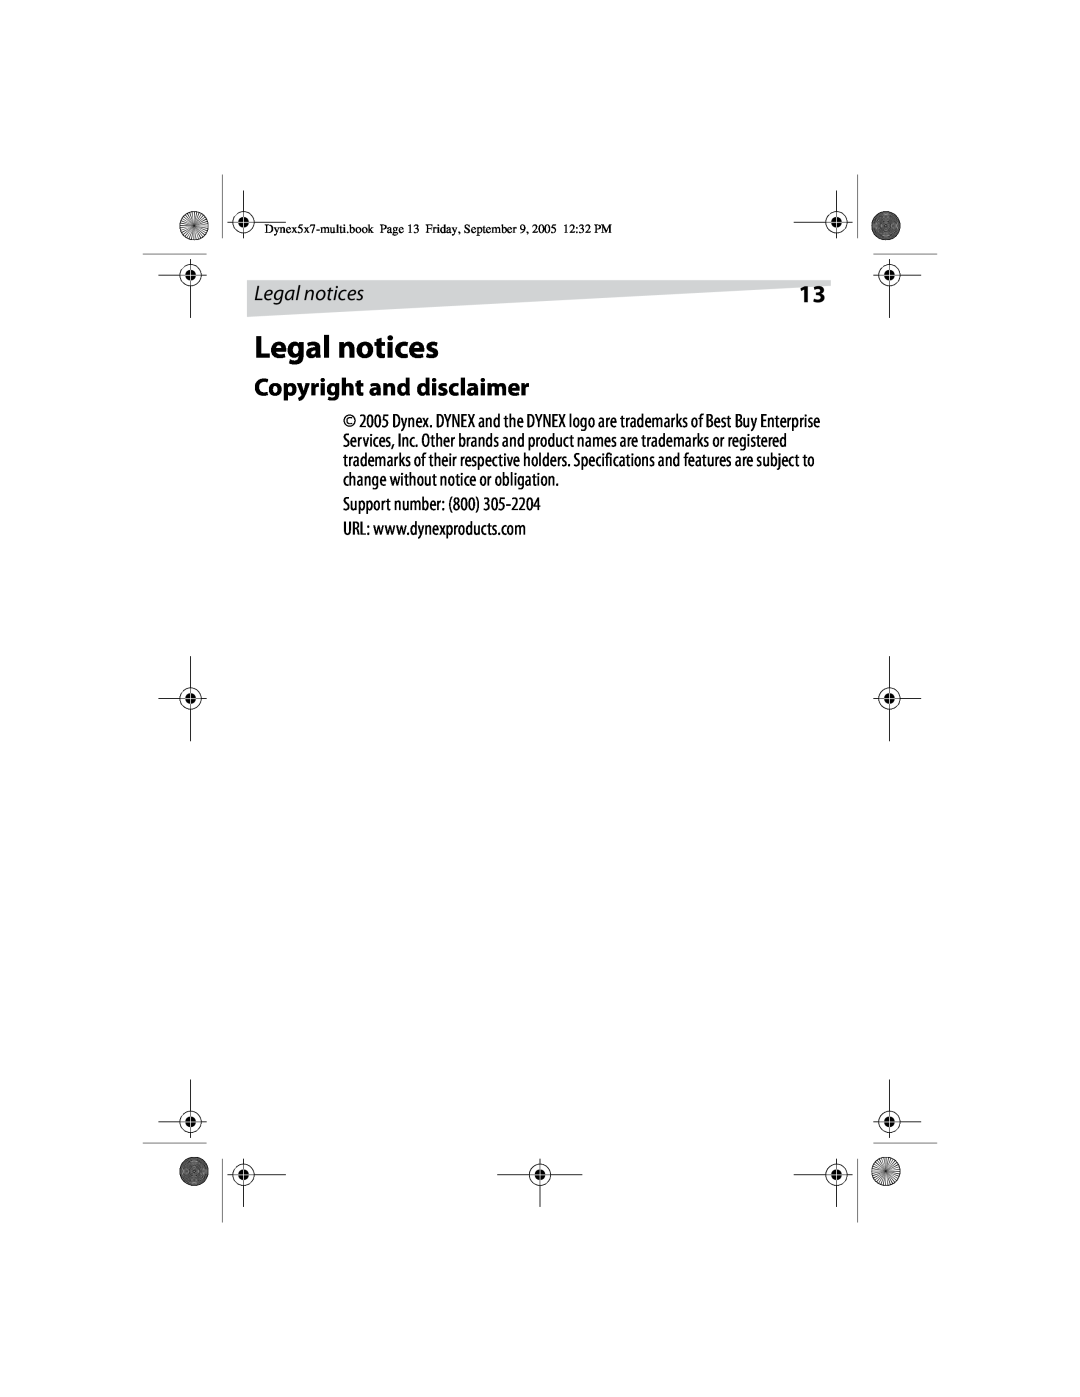 Dynex DX-E101 manual Legal notices, Copyright and disclaimer, Support number 800 